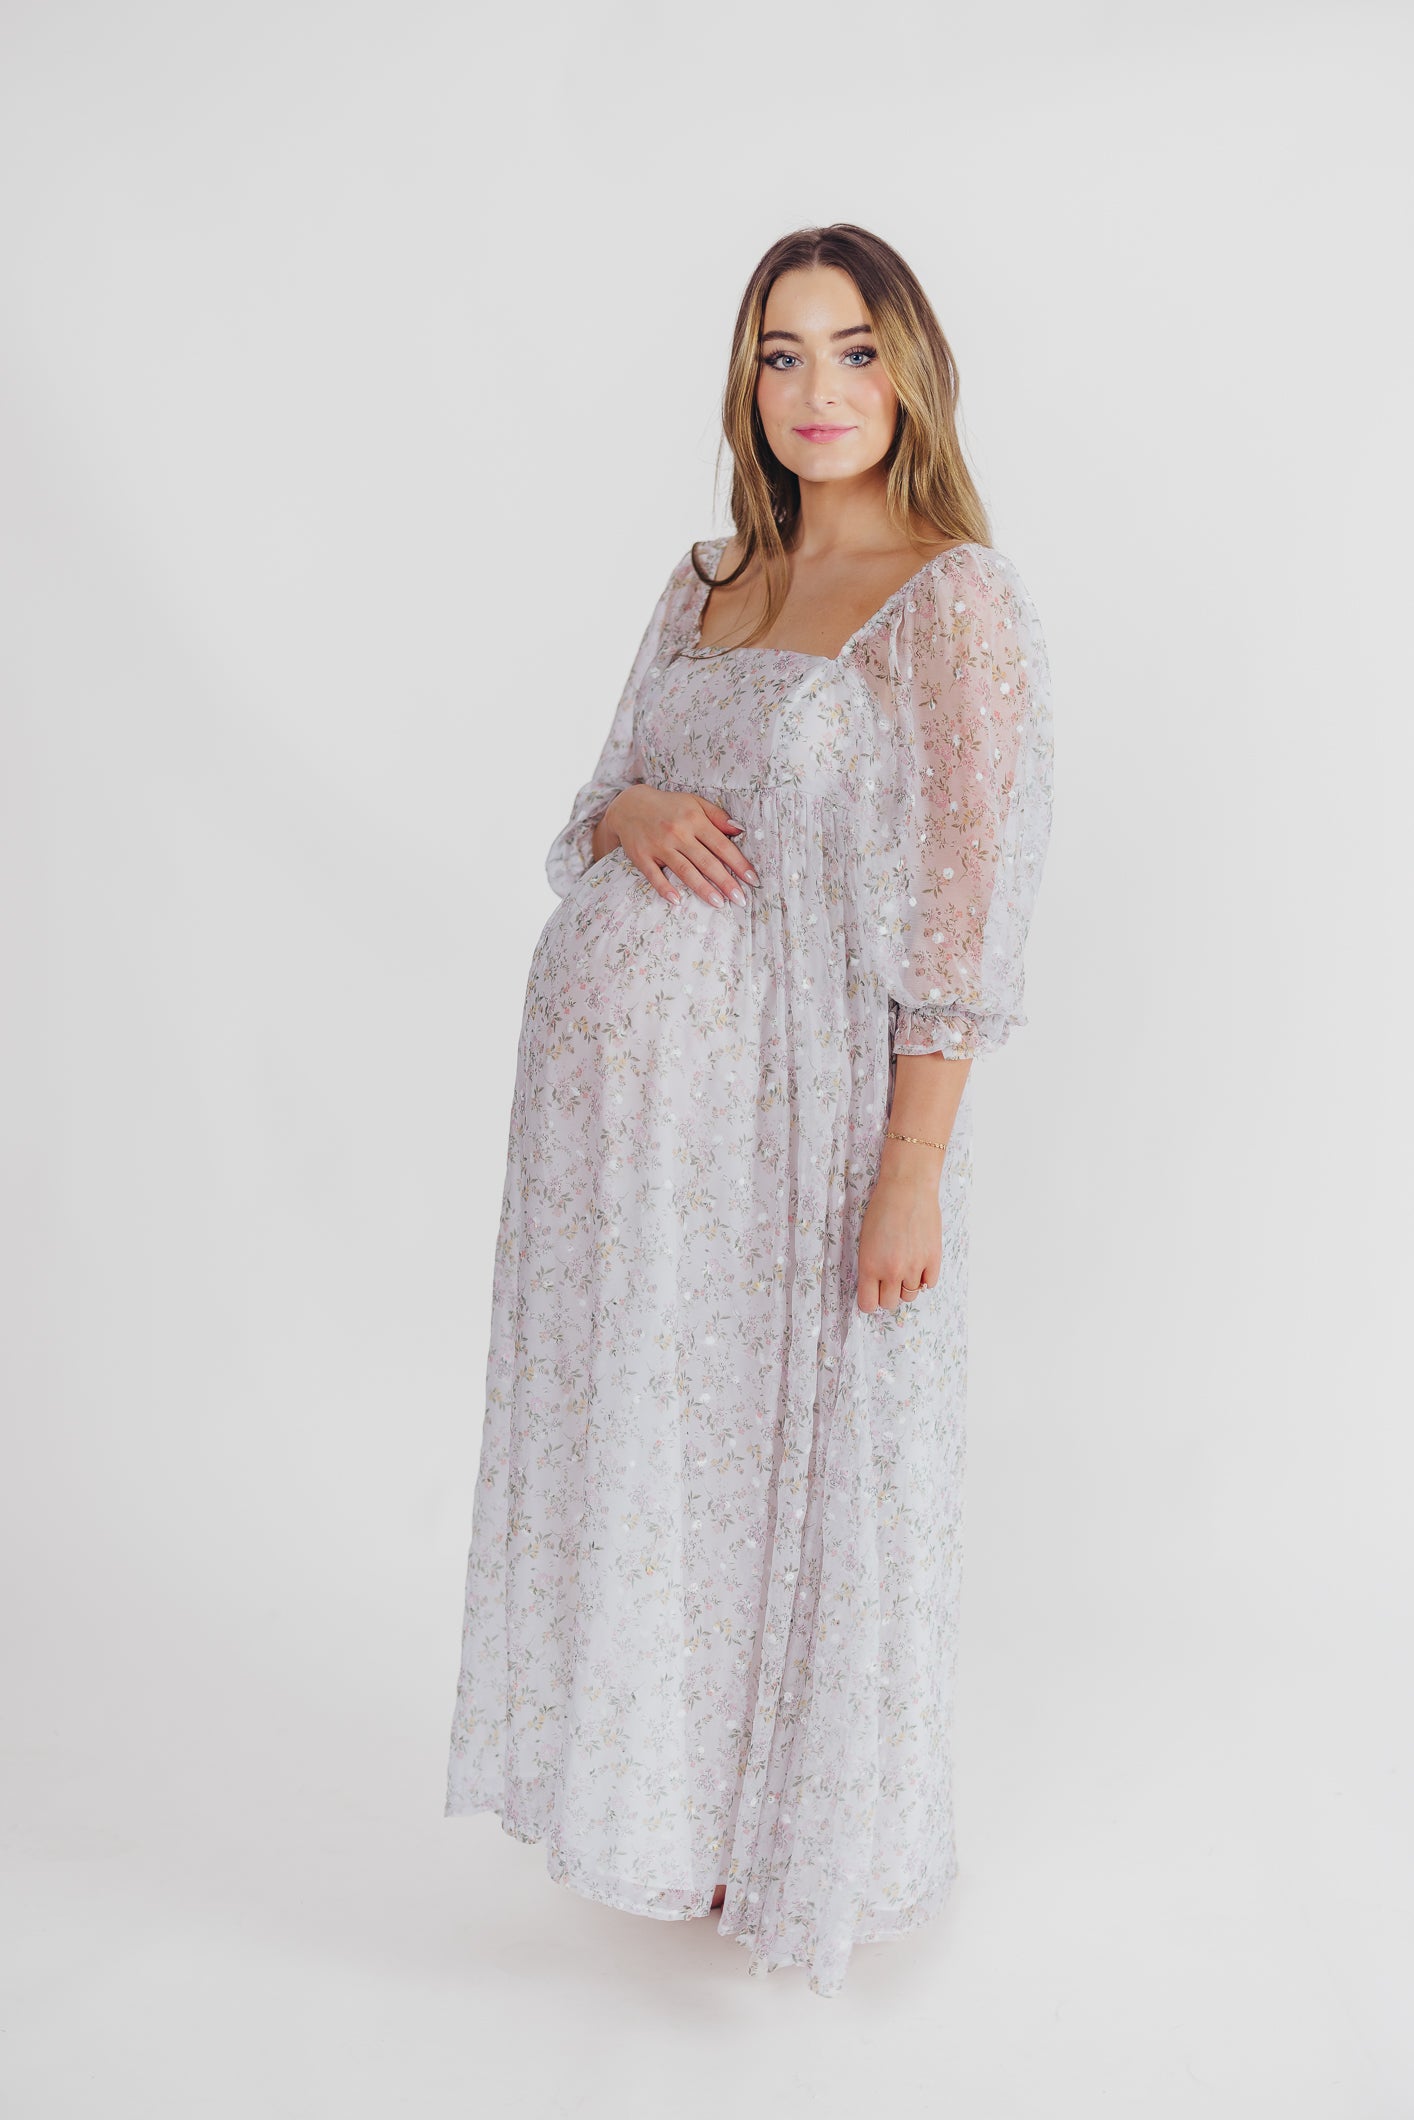 *New* Mona Maxi Dress with Smocking in Grey Floral - Bump Friendly (S-3XL)